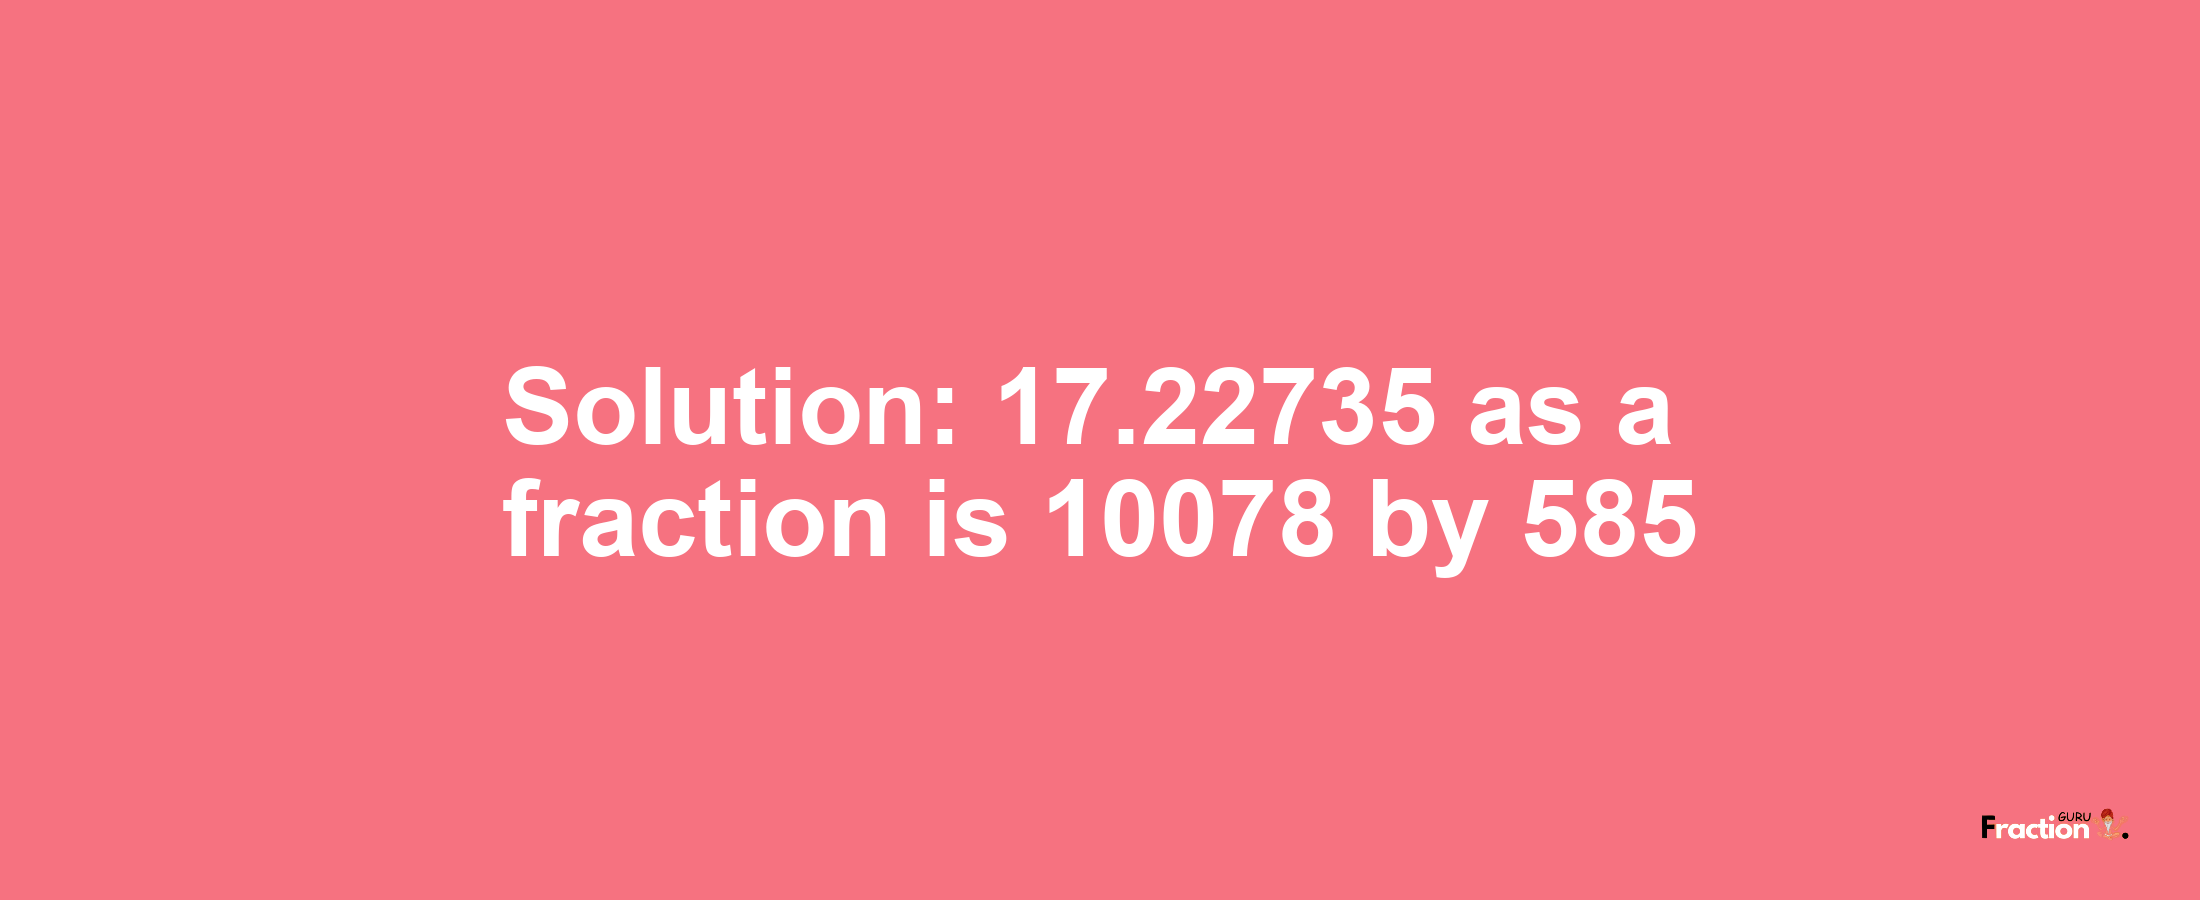 Solution:17.22735 as a fraction is 10078/585